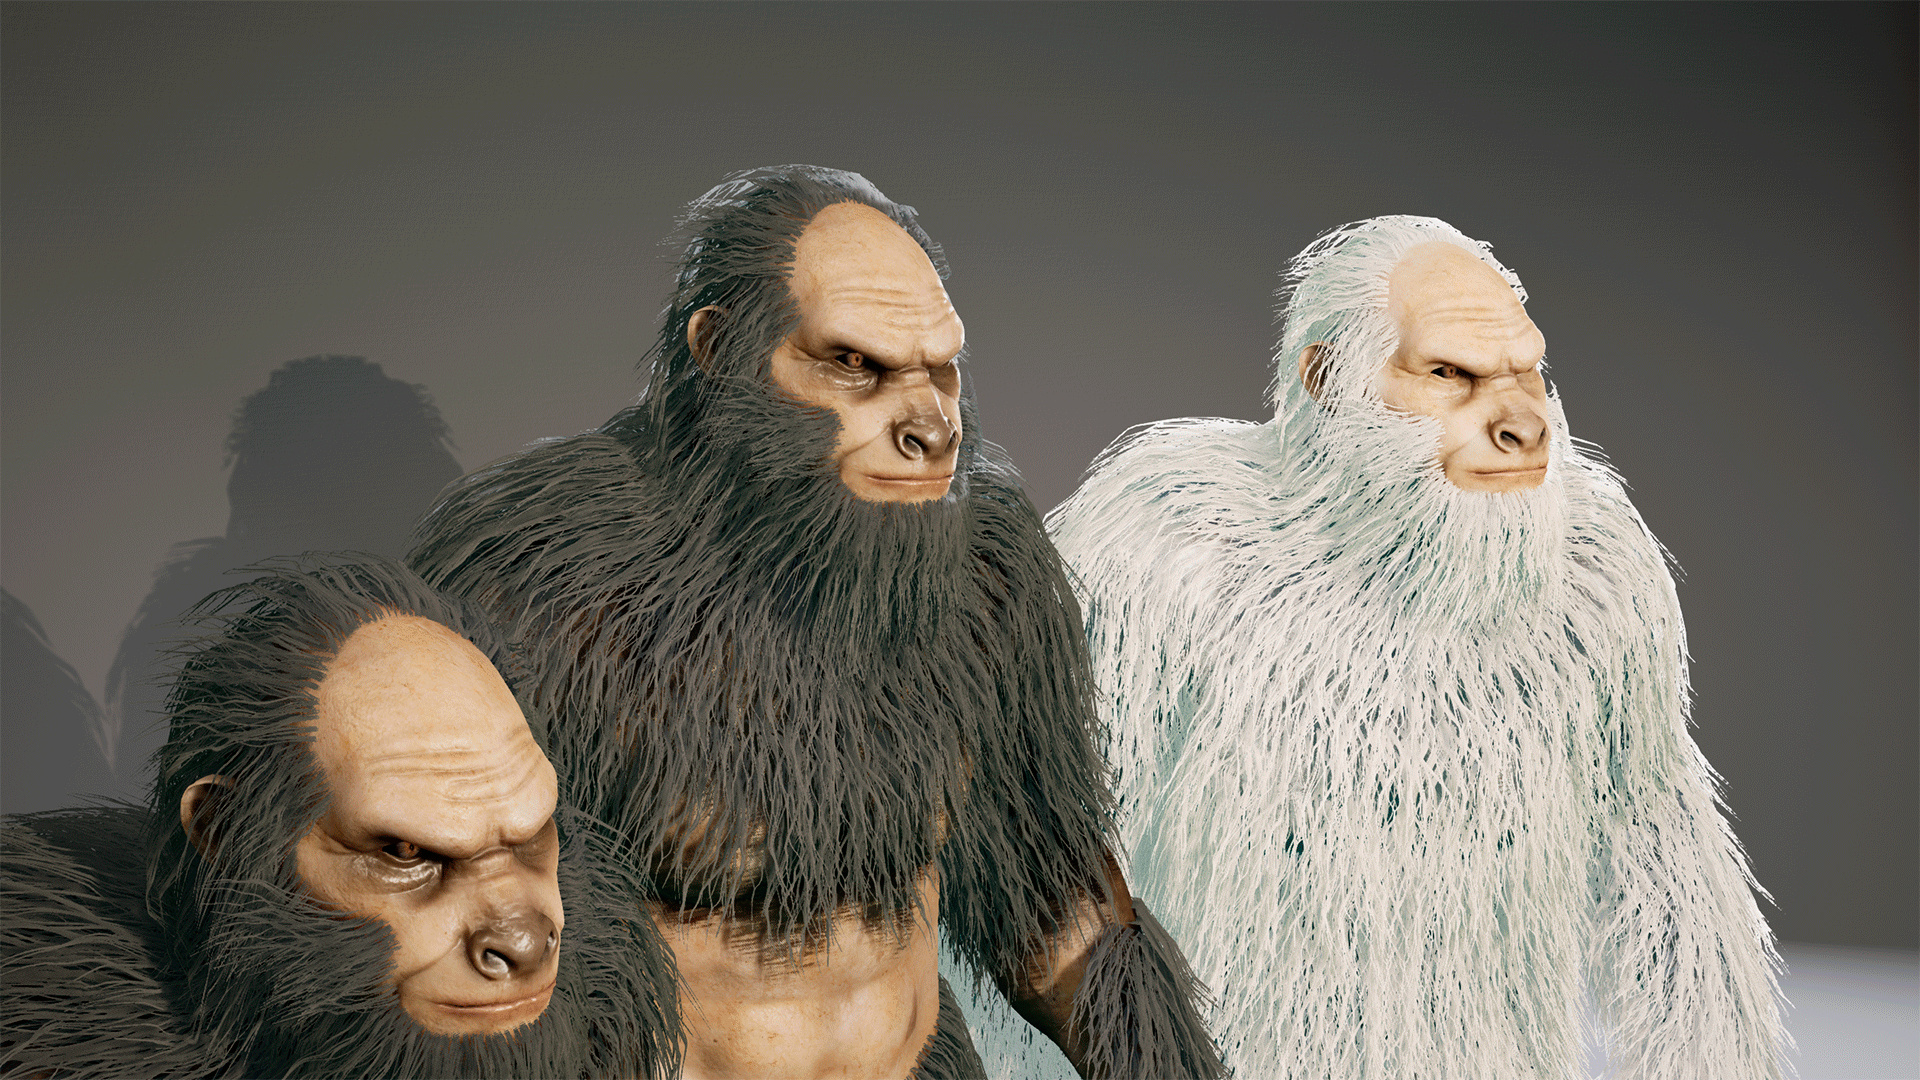 Bigfoot in characters, UE marketplace, Mythical creature, HD, 1920x1080 Full HD Desktop